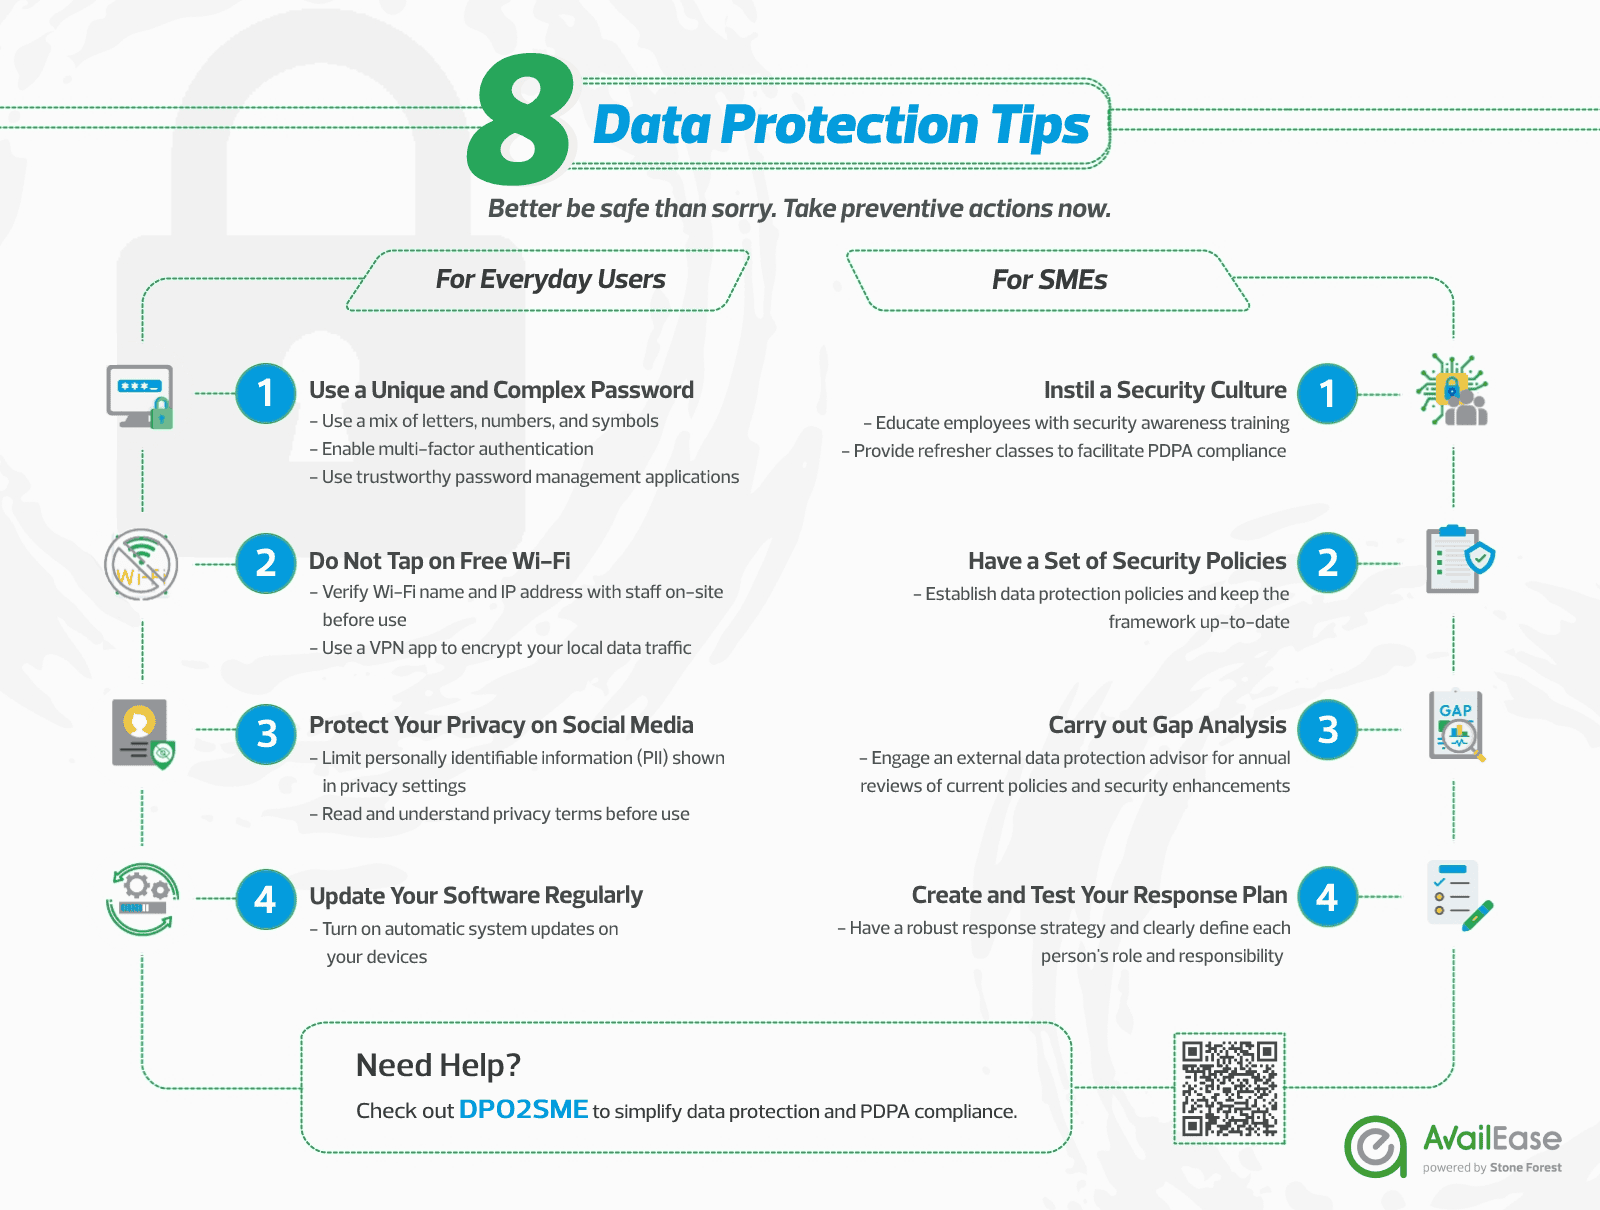 Infographic showing the 8 Data Protection Tips for SMEs and Everyday users